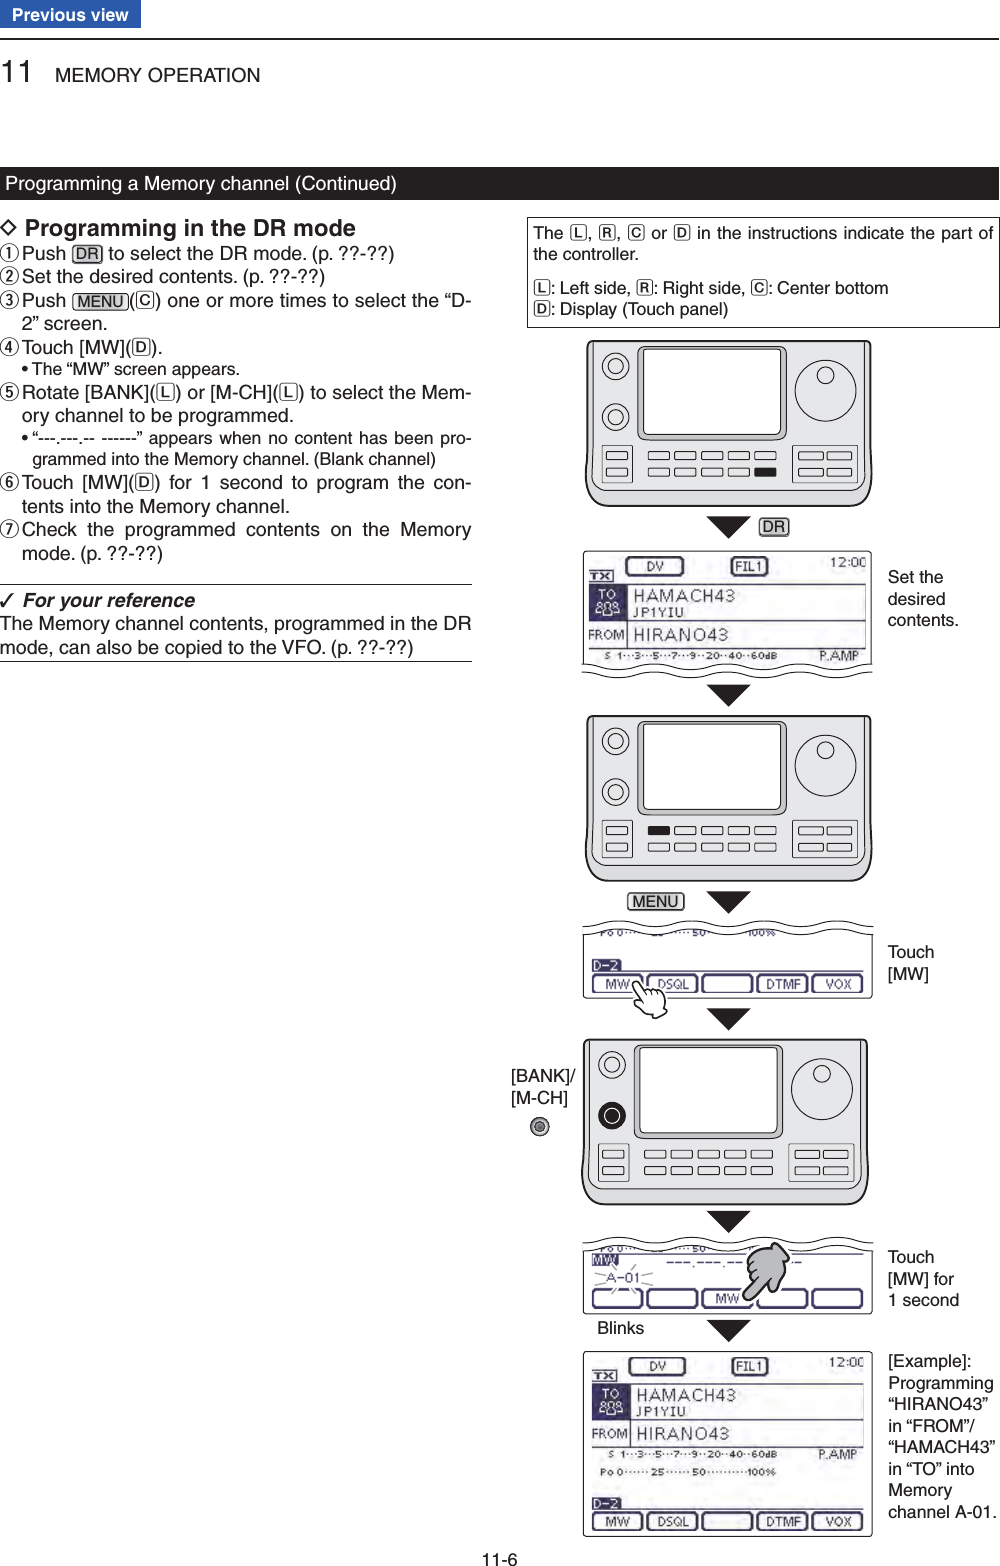 11 MEMORY OPERATION11-6Previous viewProgramming a Memory channel (Continued)Programming in the DR mode D Push  qDR to select the DR mode. (p. ??-??) Set the desired contents.  w(p. ??-??) Push  eMENU (C) one or more times to select the “D-2” screen. Touch [MW]( rD). •  The “MW” screen appears. Rotate [BANK]( tL) or [M-CH](L) to select the Mem-ory channel to be programmed. •  “---.---.-- ------” appears when no content has been pro-grammed into the Memory channel. (Blank channel) Touch [MW]( yD) for 1 second to program the con-tents into the Memory channel. Check the programmed contents on the Memory  umode. (p. ??-??)For your reference ✓The Memory channel contents, programmed in the DR mode, can also be copied to the VFO. (p. ??-??)The L, R, C or D in the instructions indicate the part of the controller.L: Left side, R: Right side, C: Center bottomD: Display (Touch panel)Set the desired contents.BlinksTouch [MW]Touch [MW] for 1 secondDRMENU[Example]:Programming “HIRANO43” in “FROM”/ “HAMACH43” in “TO” into Memory channel A-01.[BANK]/[M-CH]